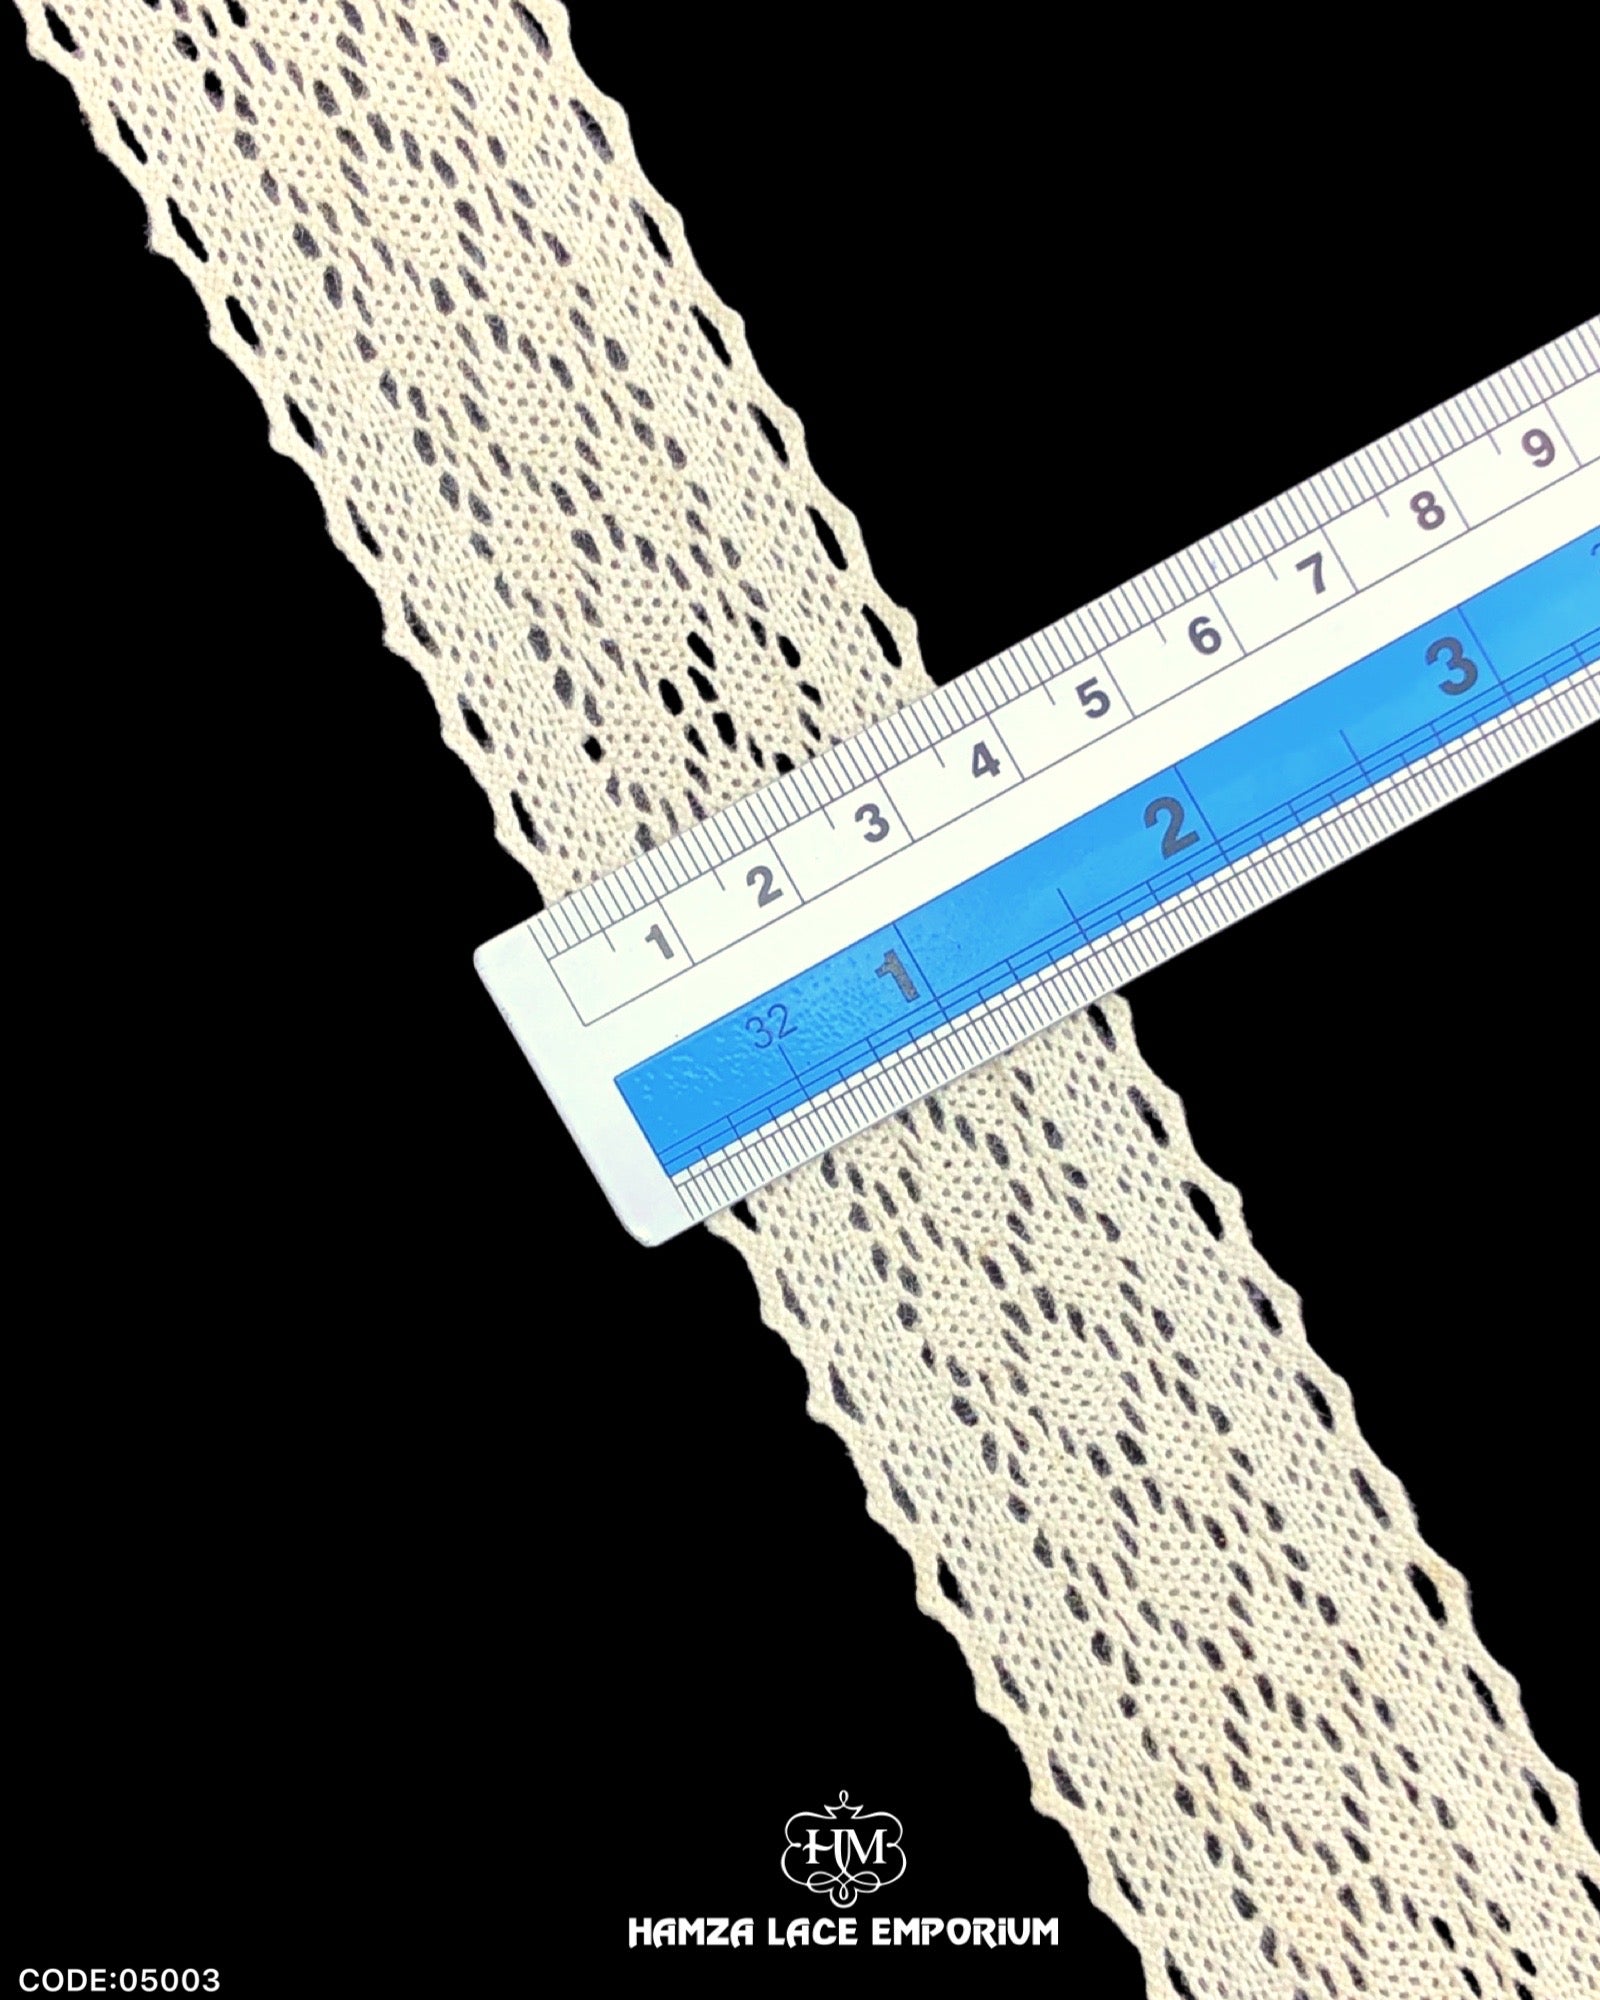 Size of the 'Center Filling Crochet Lace 05003' is shown with the help of a ruler as '2' inches